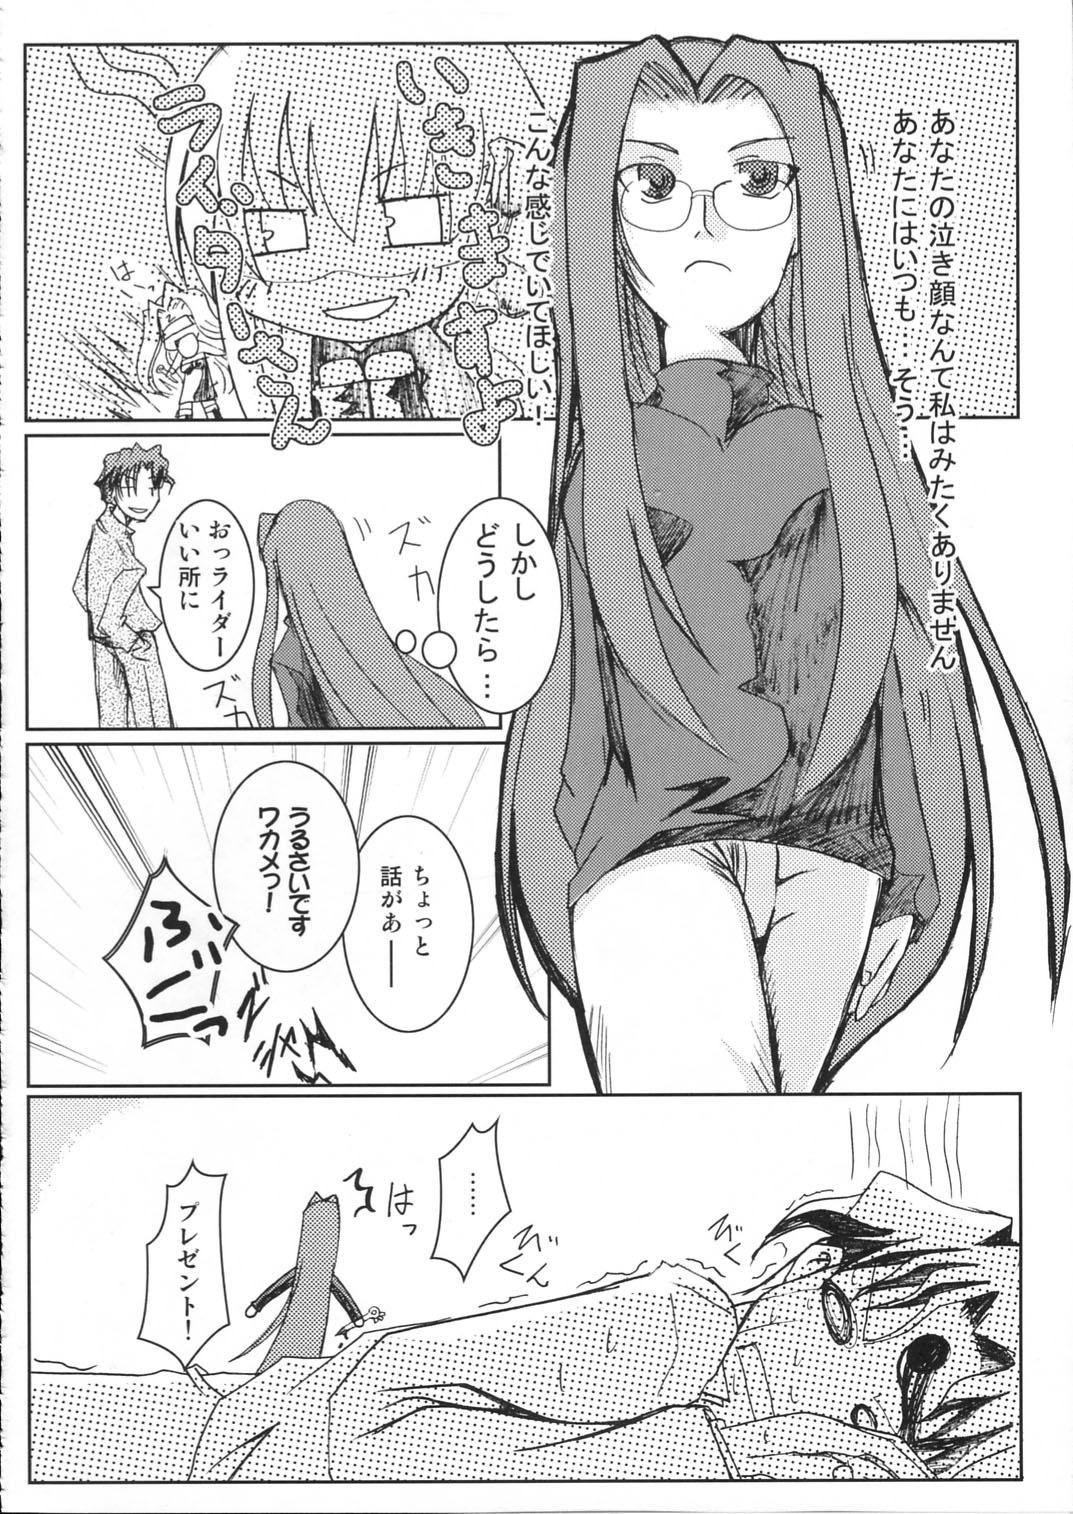 Tiny Girl JUDGEMENT - Fate stay night Fate hollow ataraxia Rough Porn - Page 10